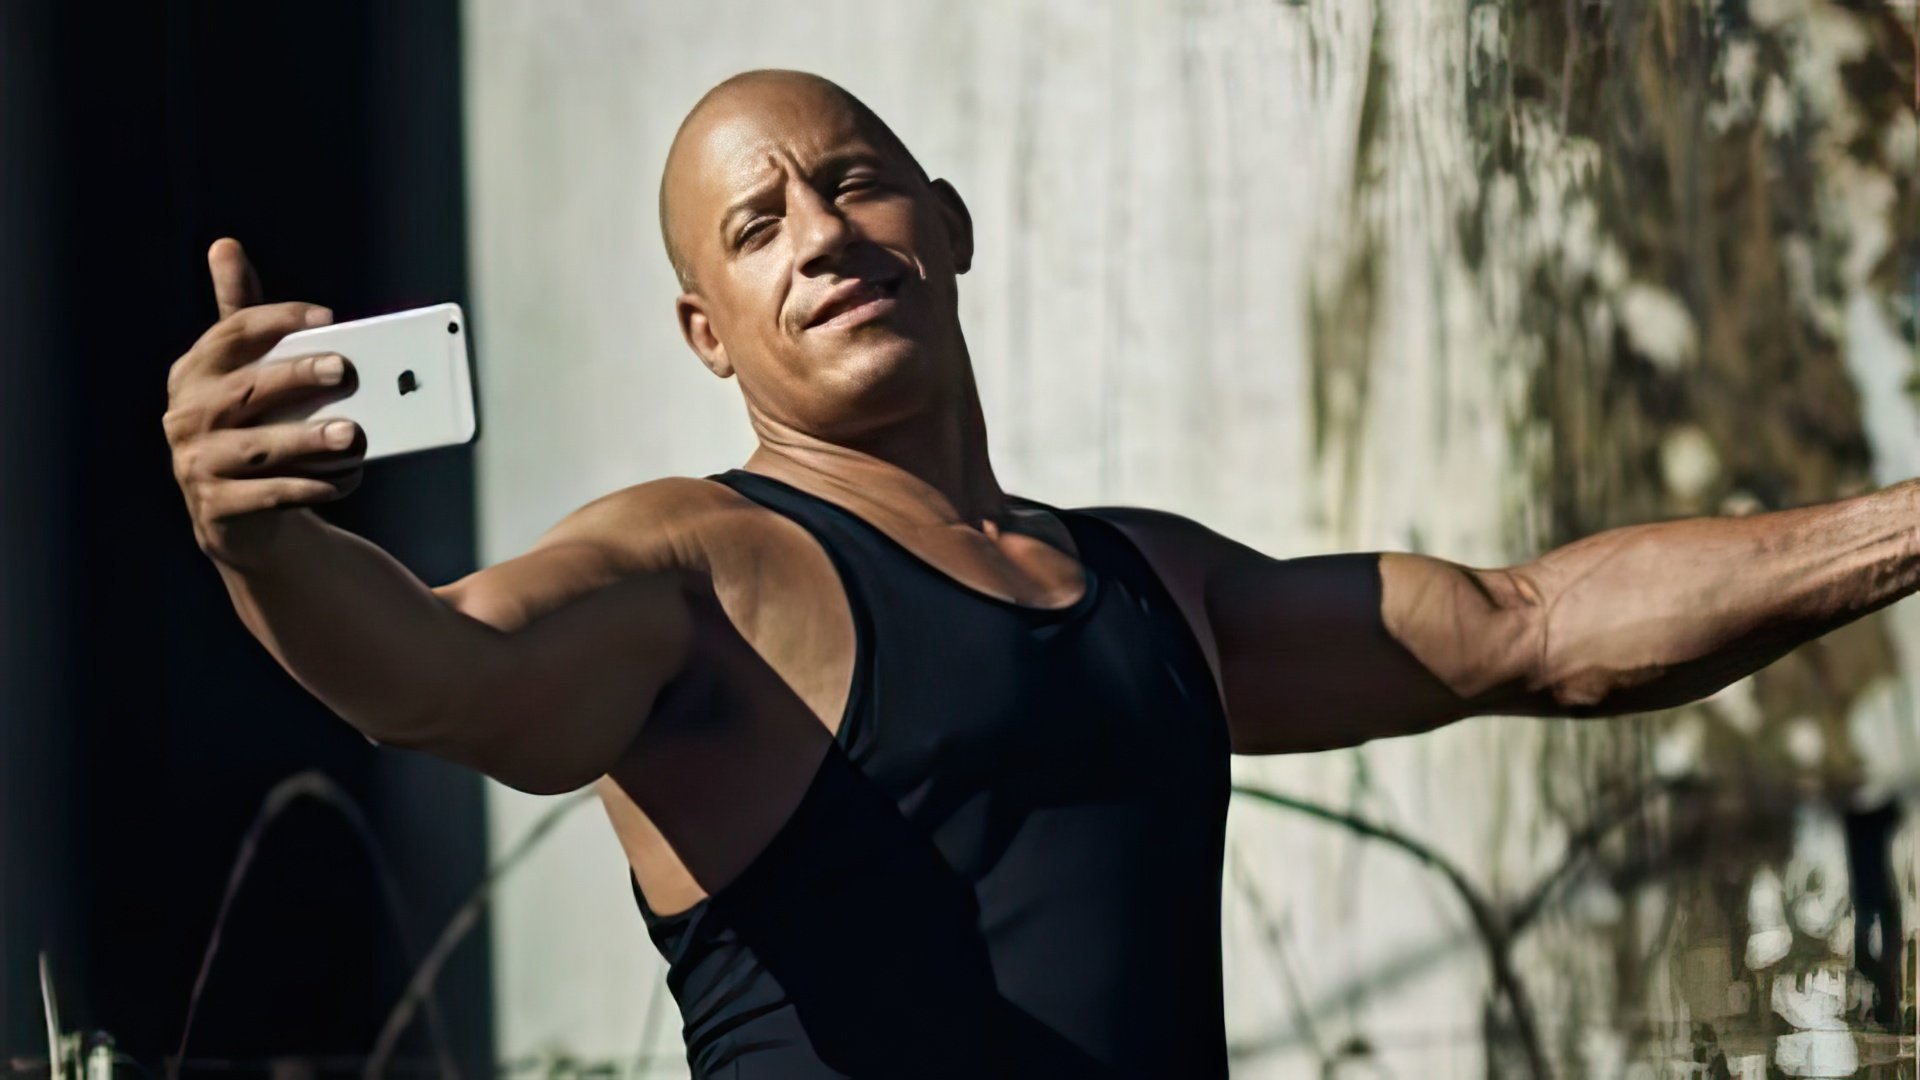 Vin Diesel remains the star of Hollywood action movies